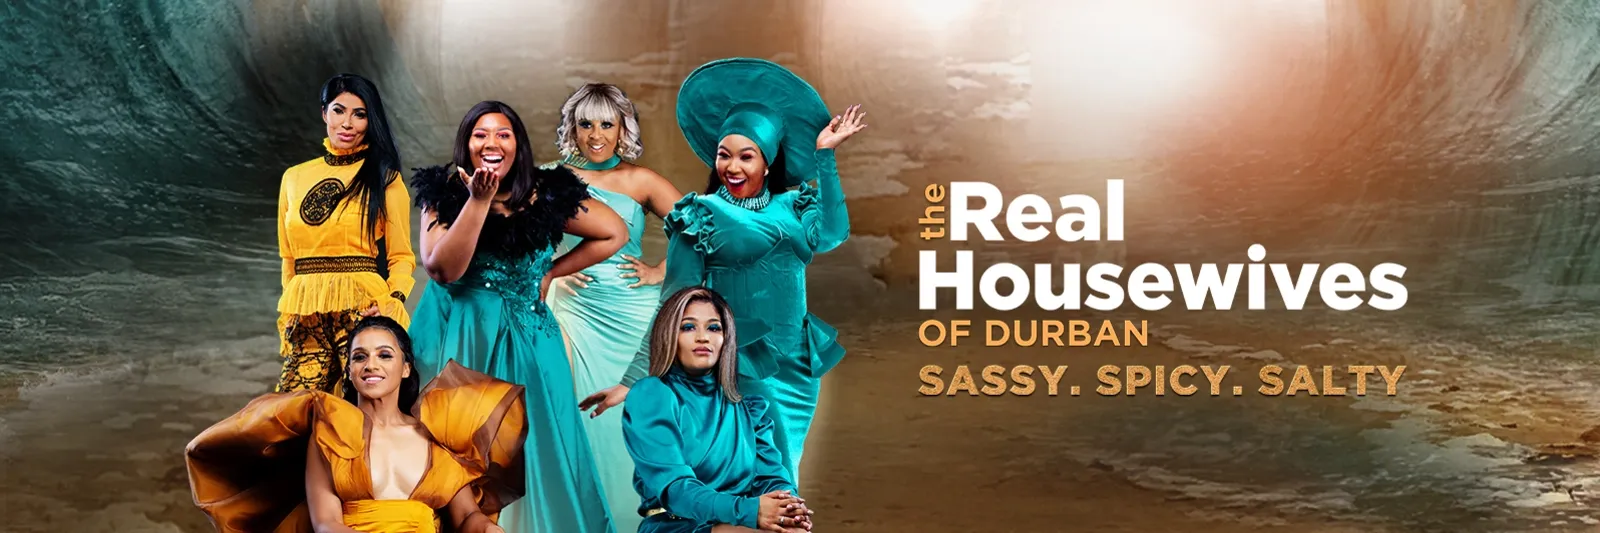 The Real Housewives Of Durban S04 (Episode 10 - 12 Added) 9